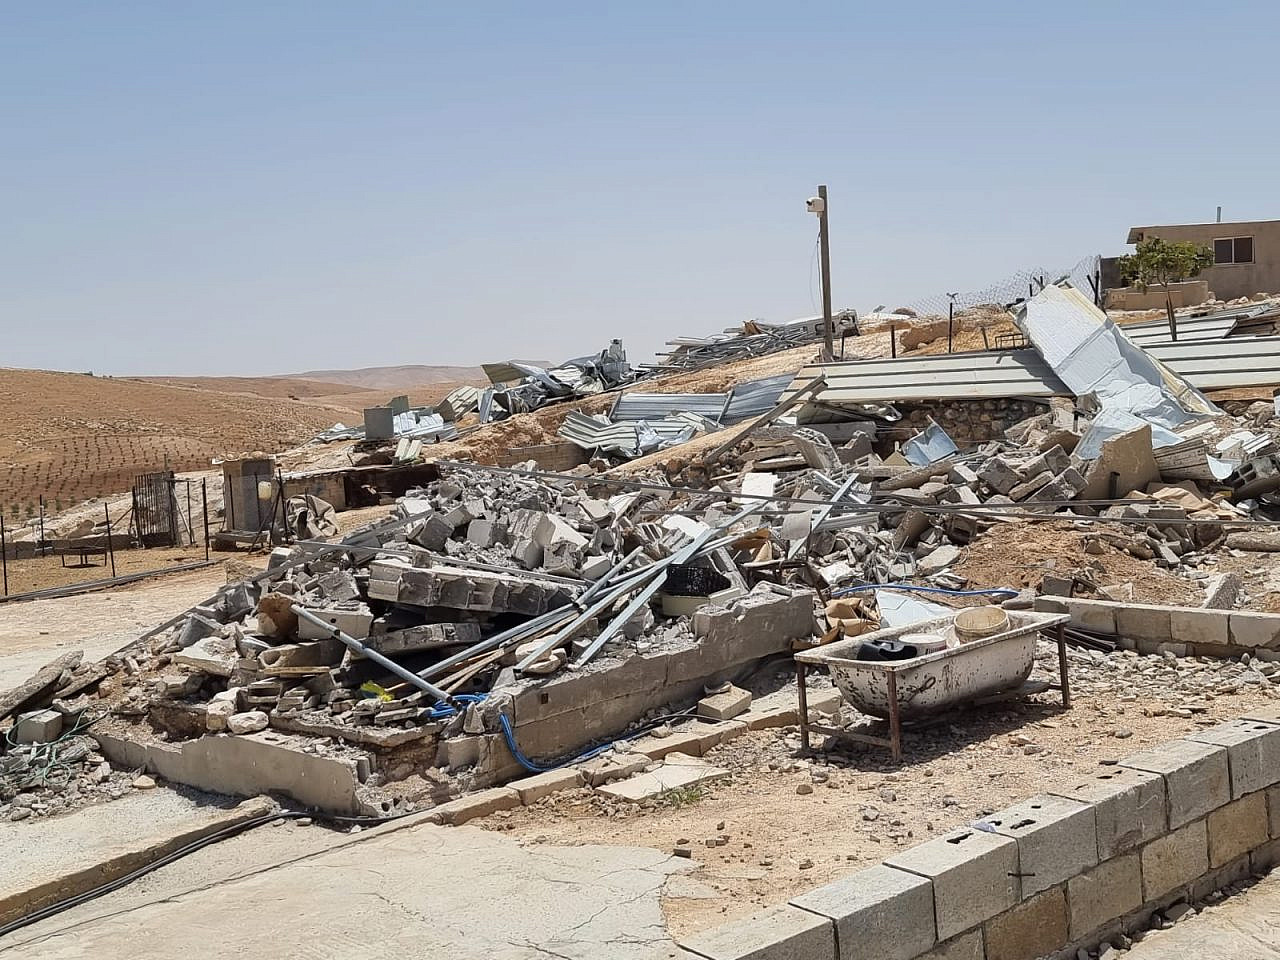 Demolished homes in Masafer Yatta in the occupied West Bank, June 1, 2022. (Yuval Abraham)